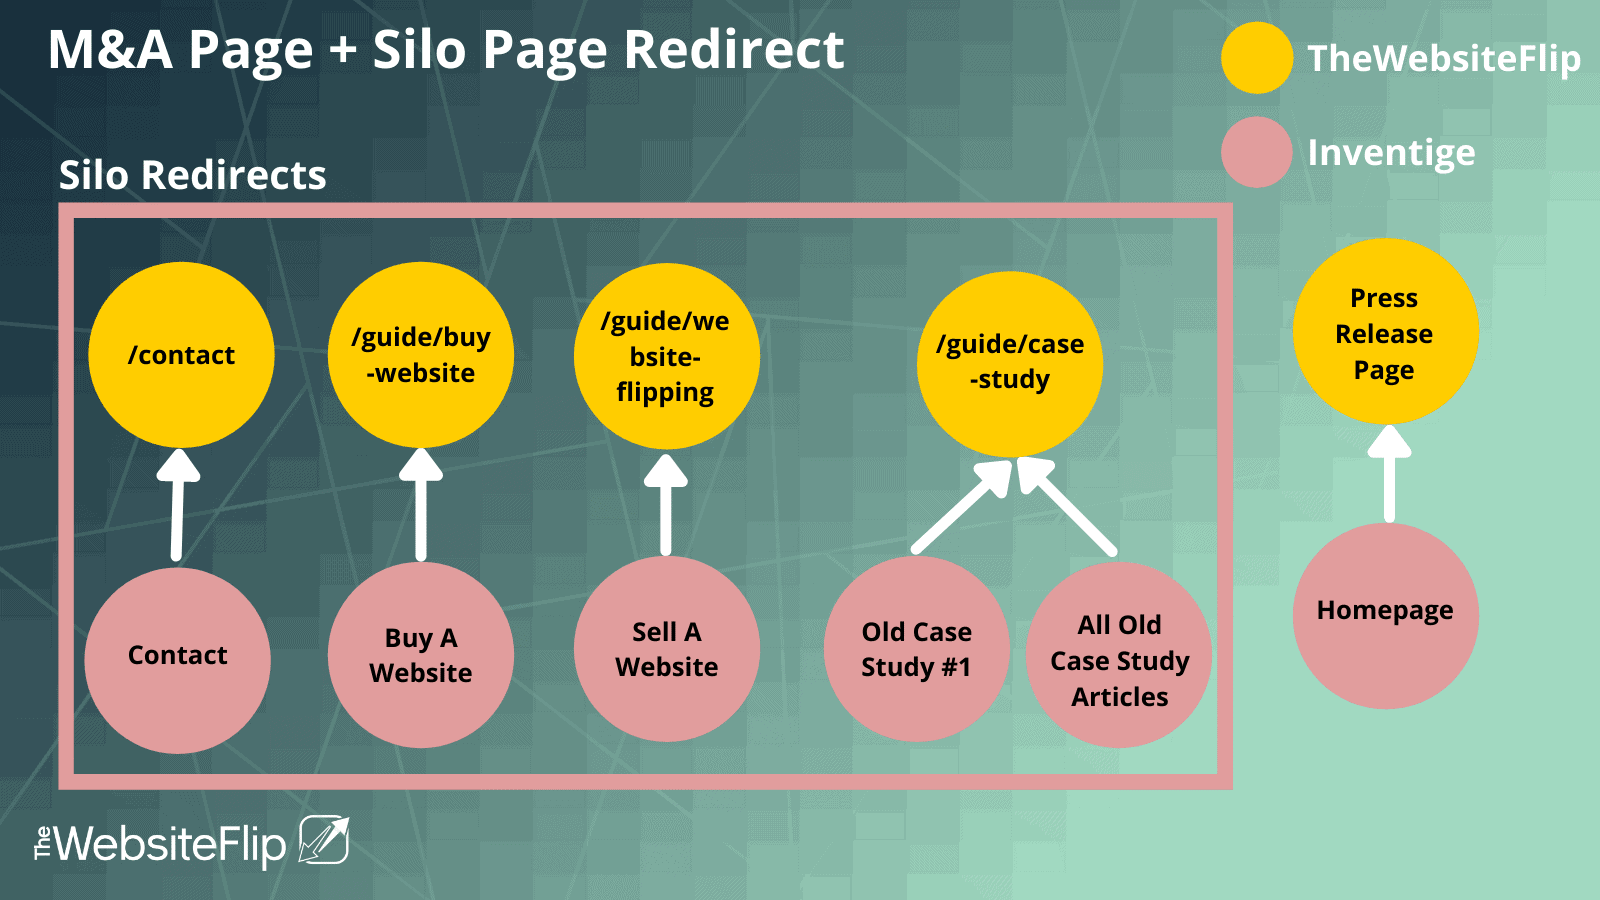 TheWebsiteFlip and Inventige redirects